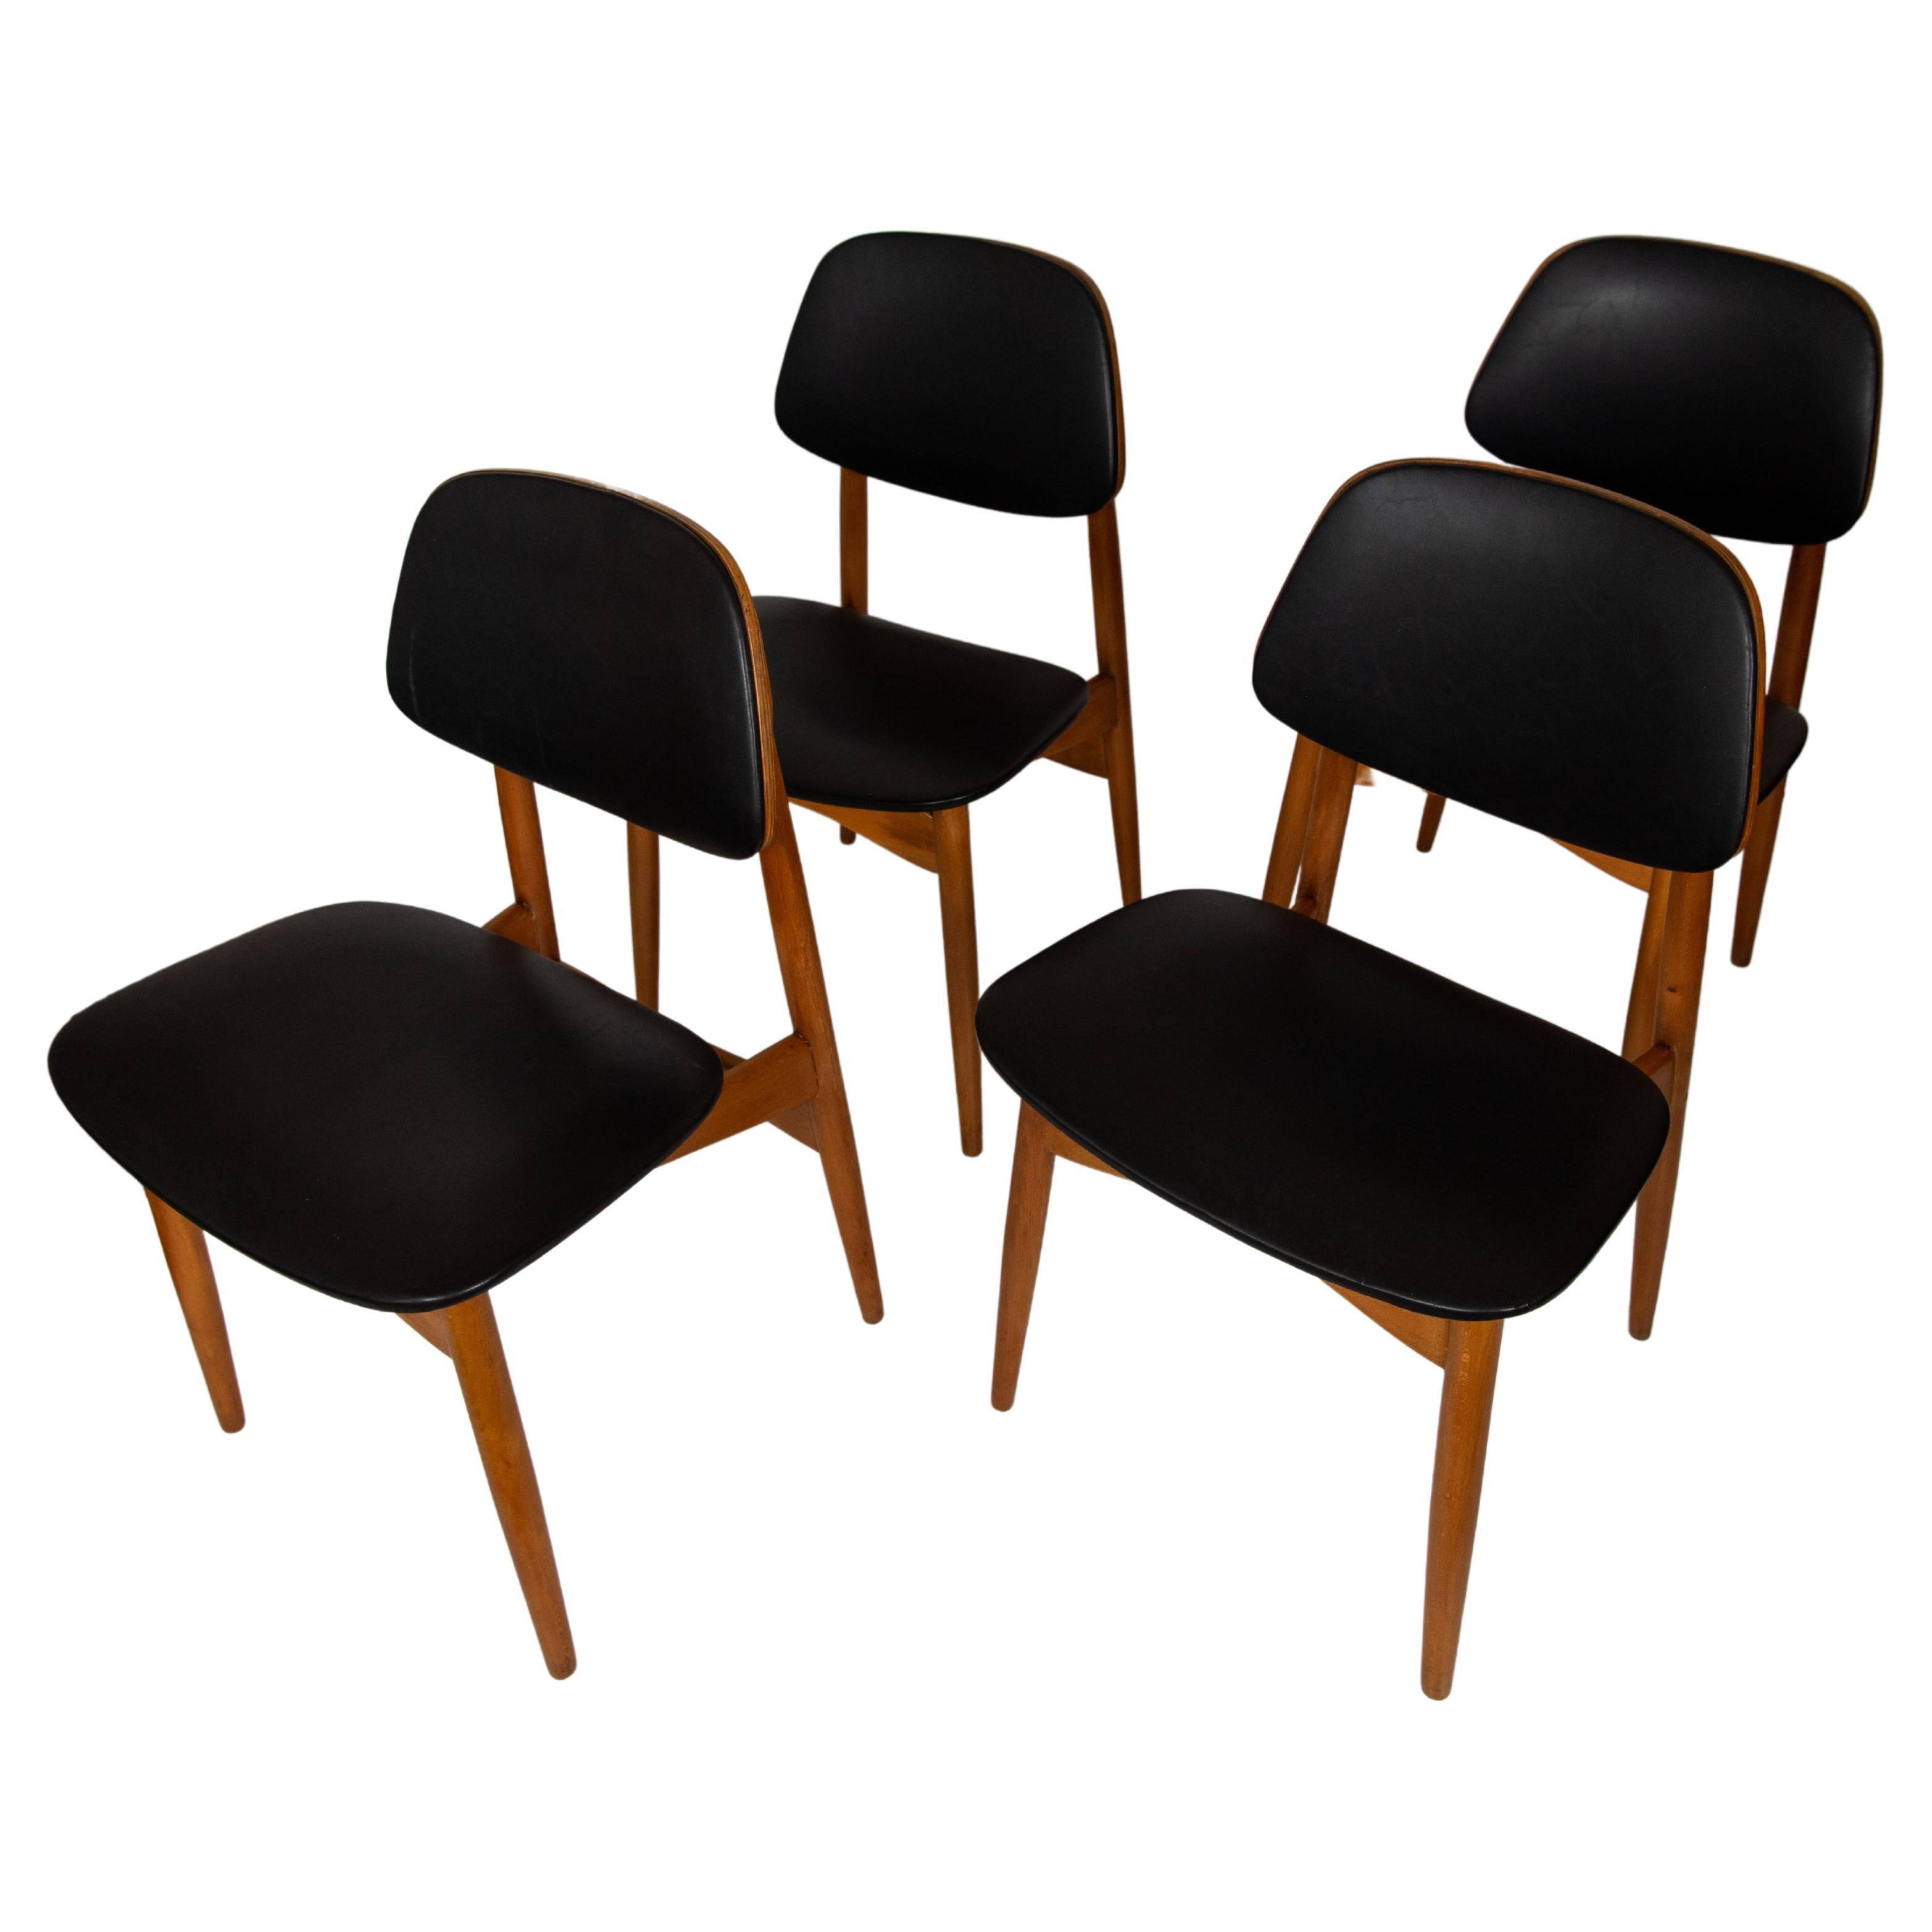 Vintage wood dining chairs, Attributed to Anonima Castelli, Italy 1960s